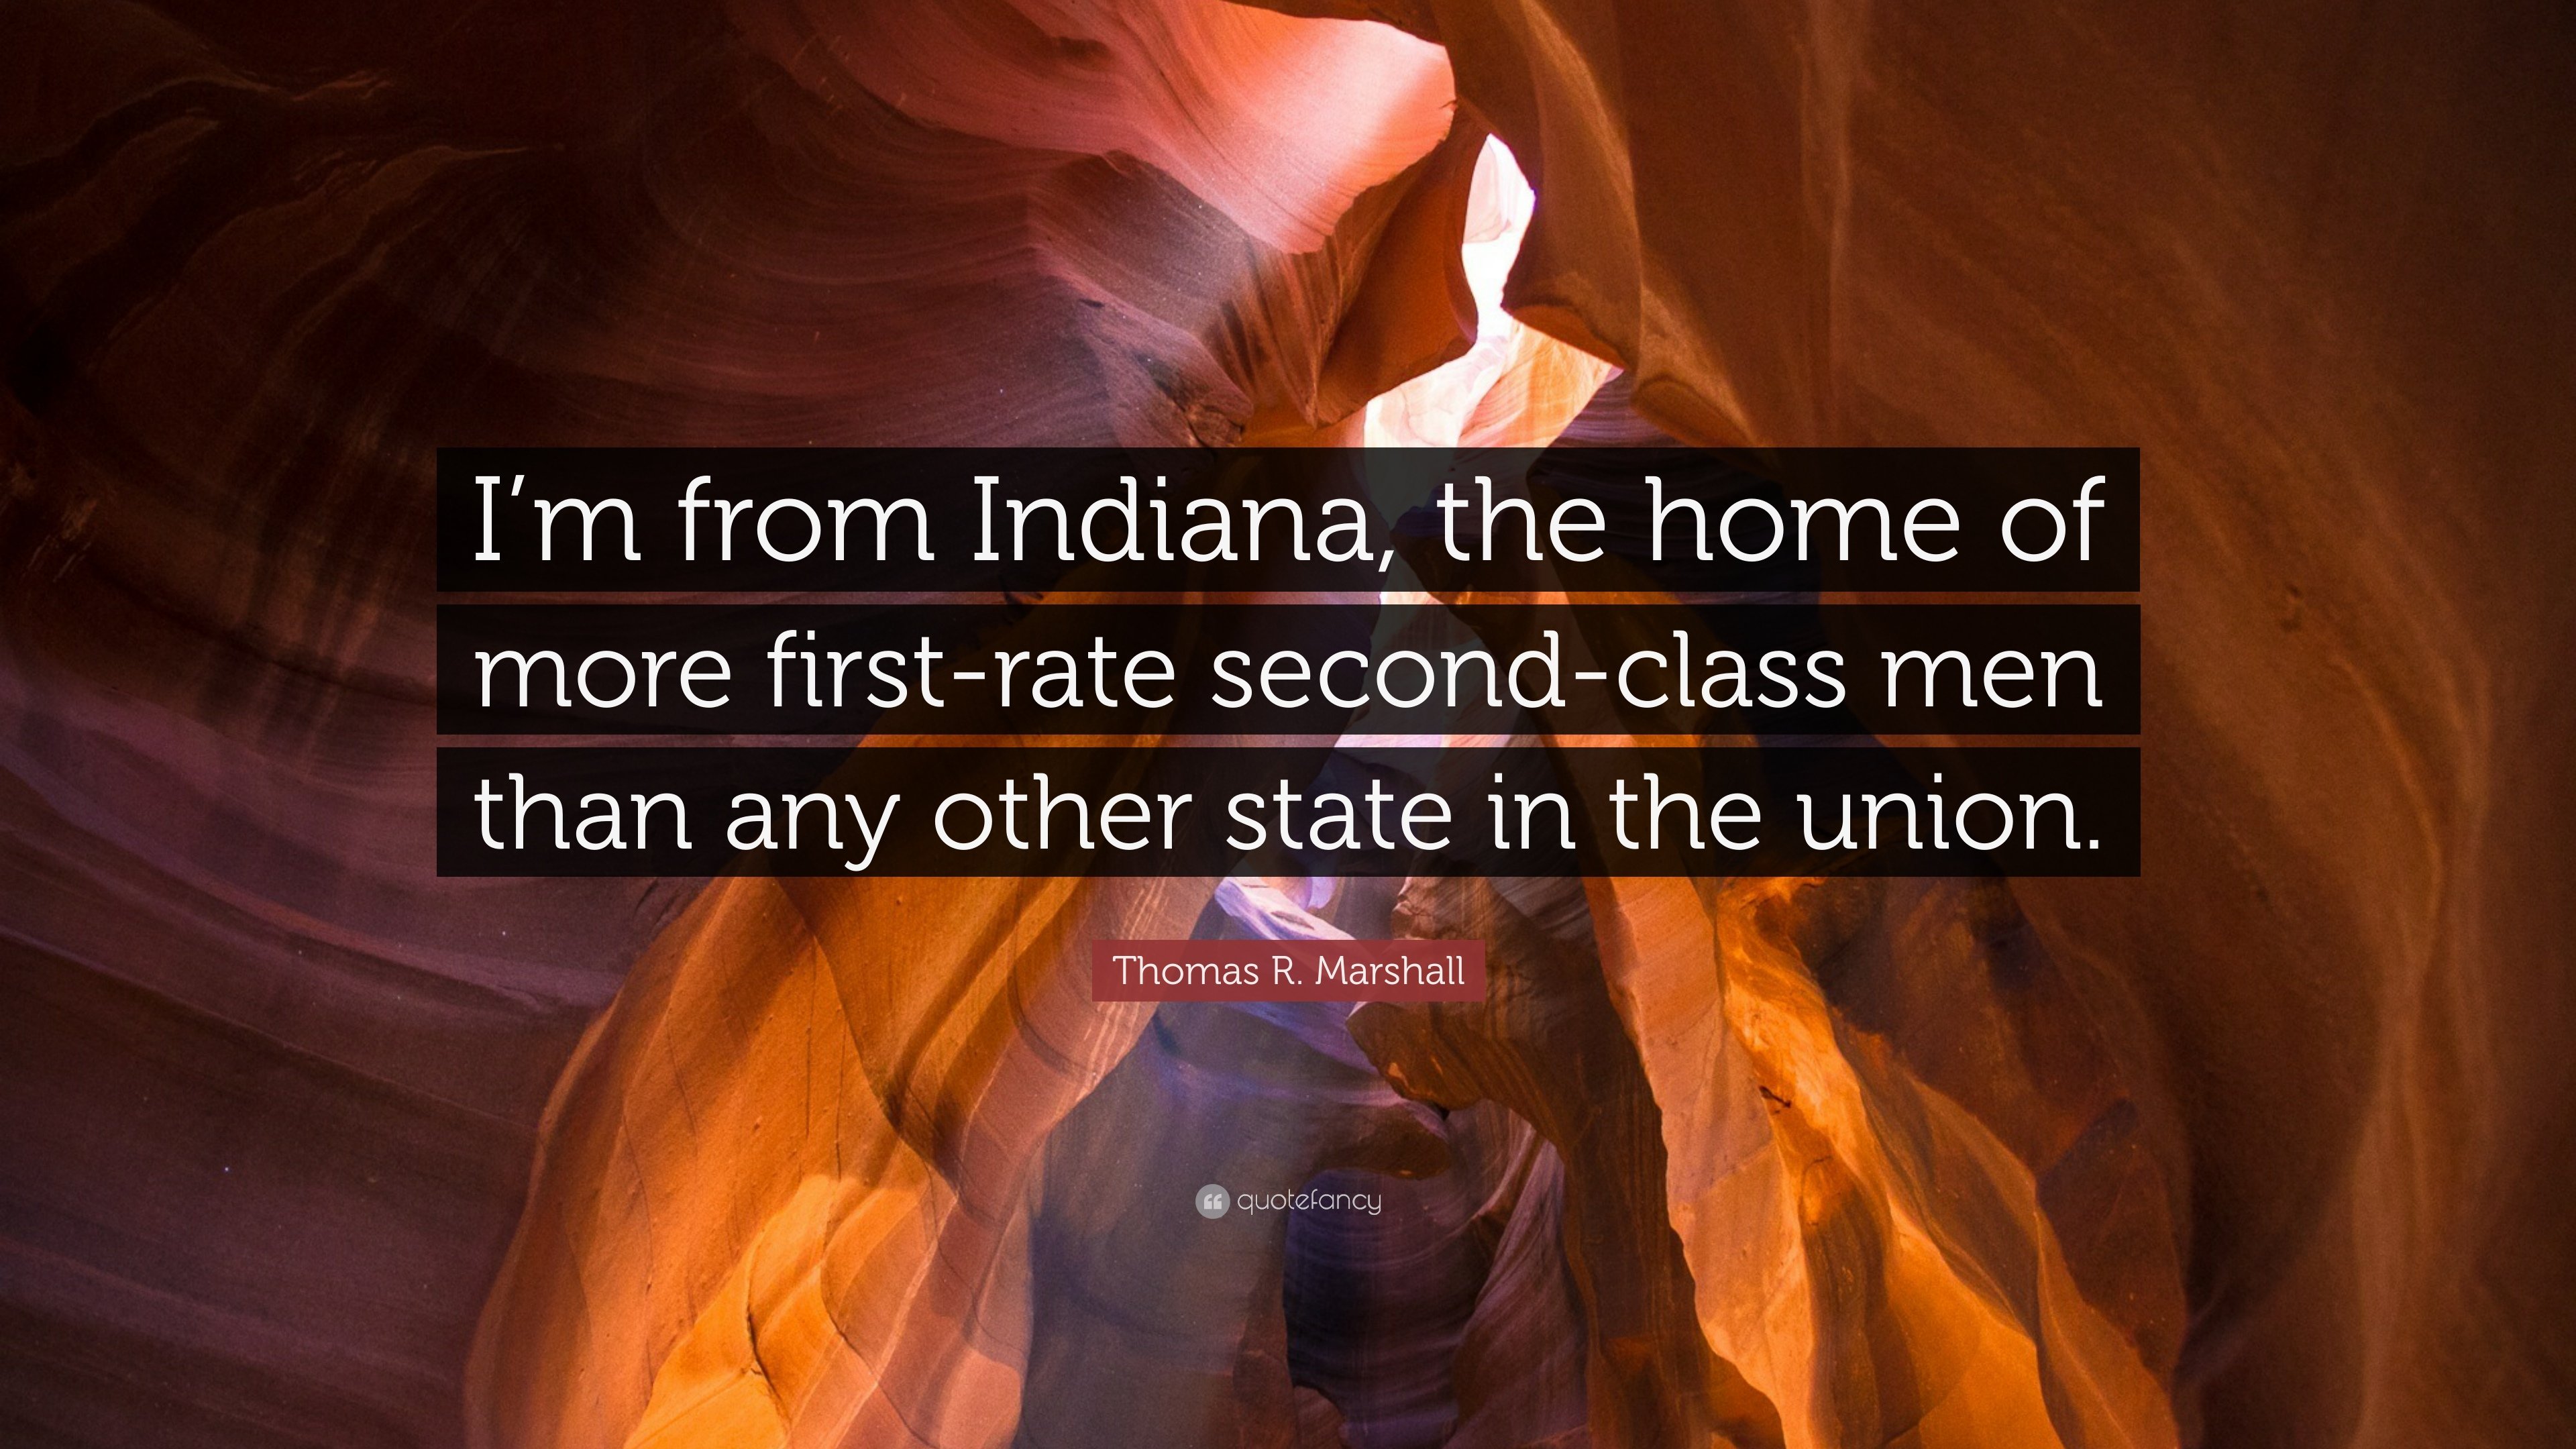 Thomas R. Marshall Quote: “I'm from Indiana, the home of more first